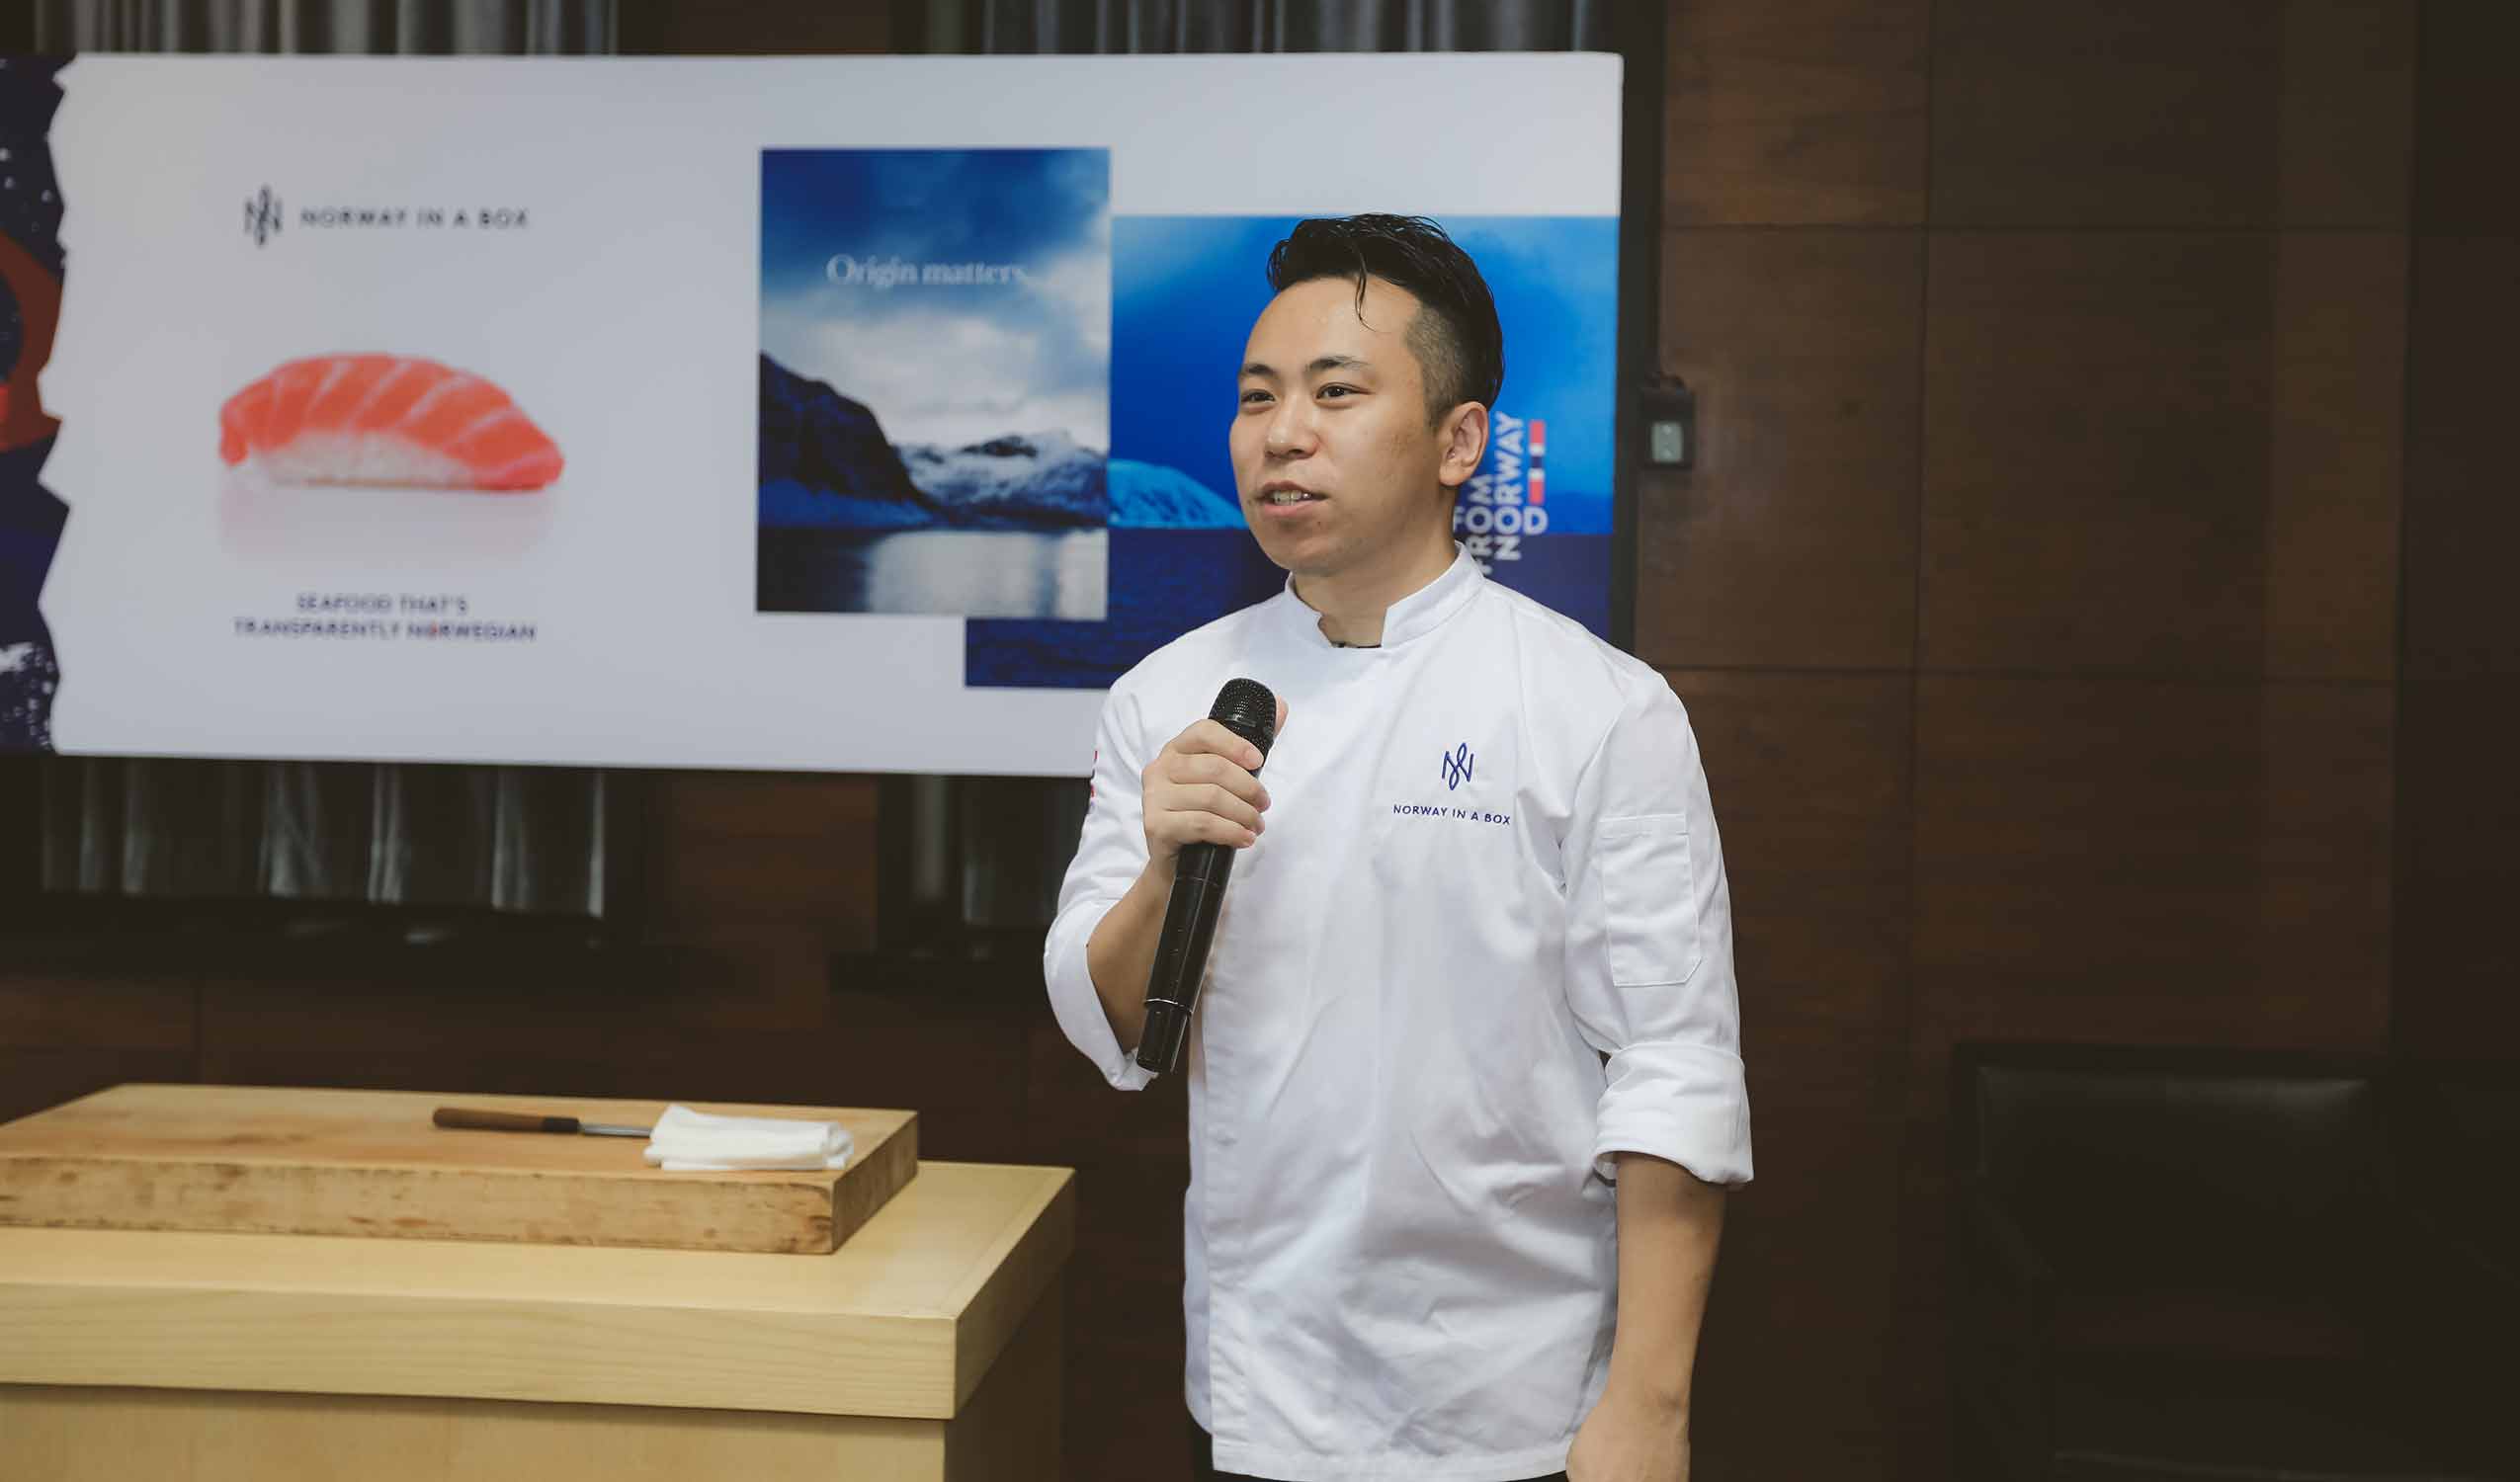 Chef speaking about sustainability at Table of Norway event in Shanghai